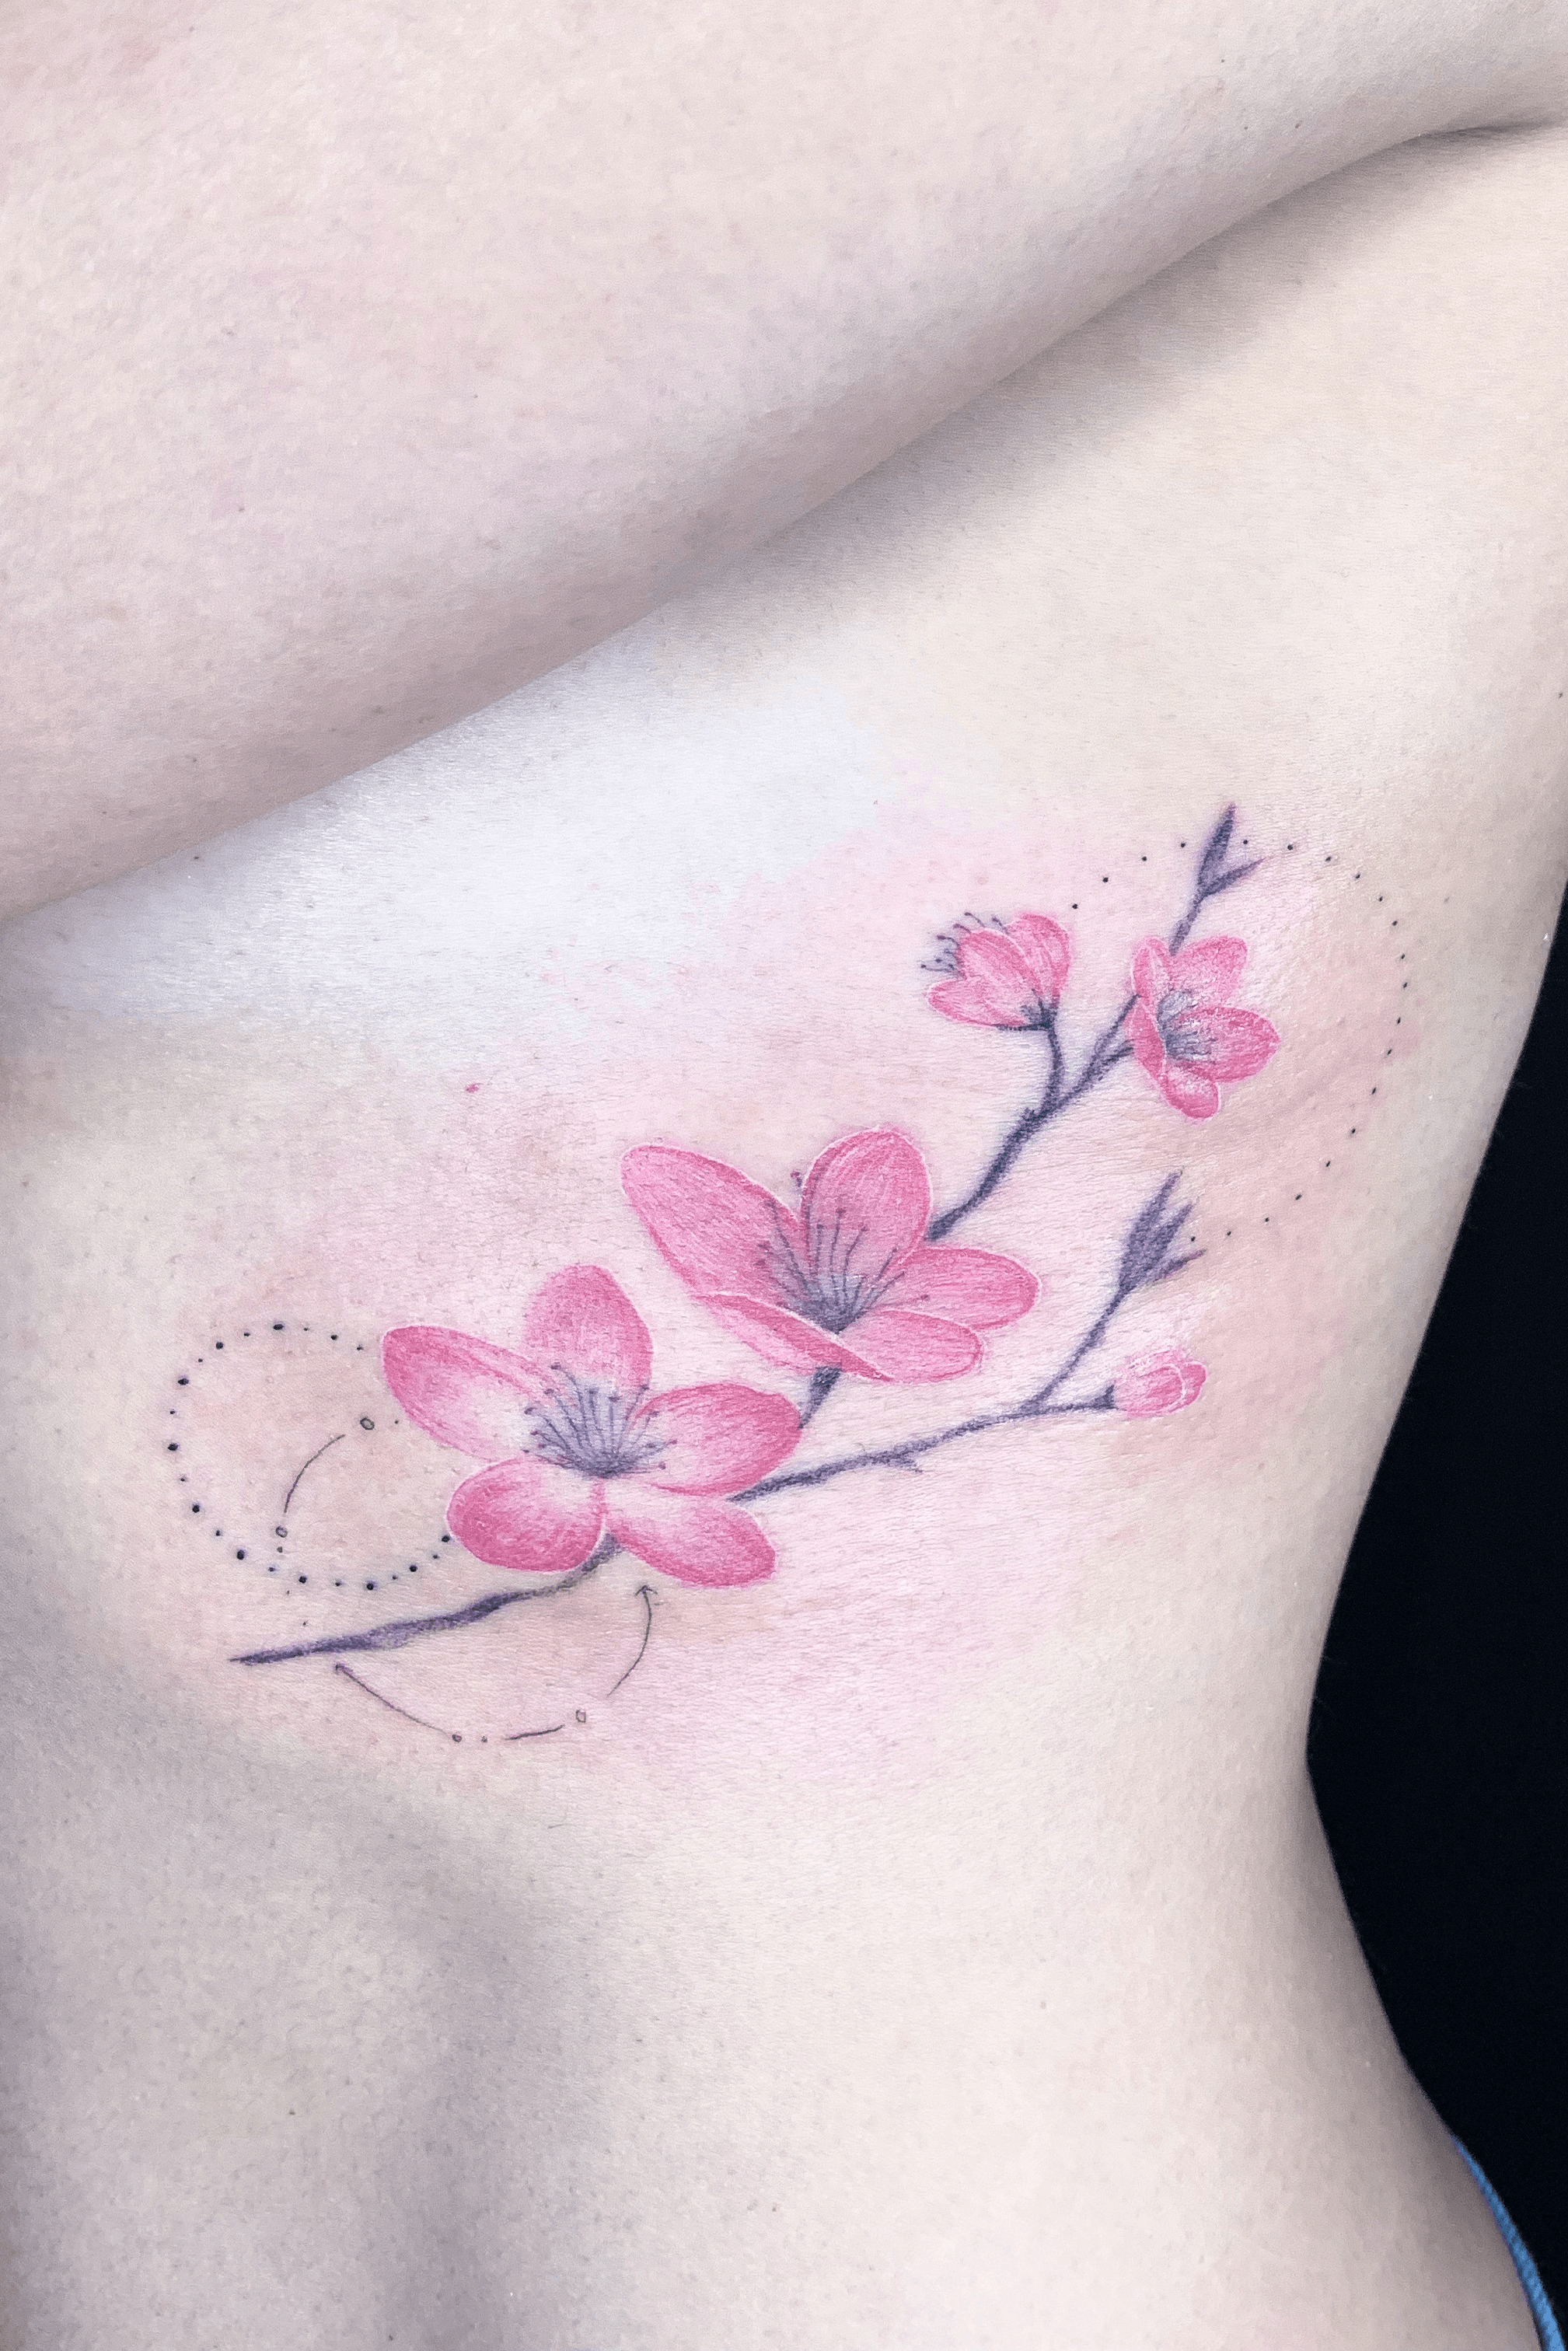 Tattoo uploaded by Yink Tattoos  Cherry blossoms on the ribs  Tattoodo